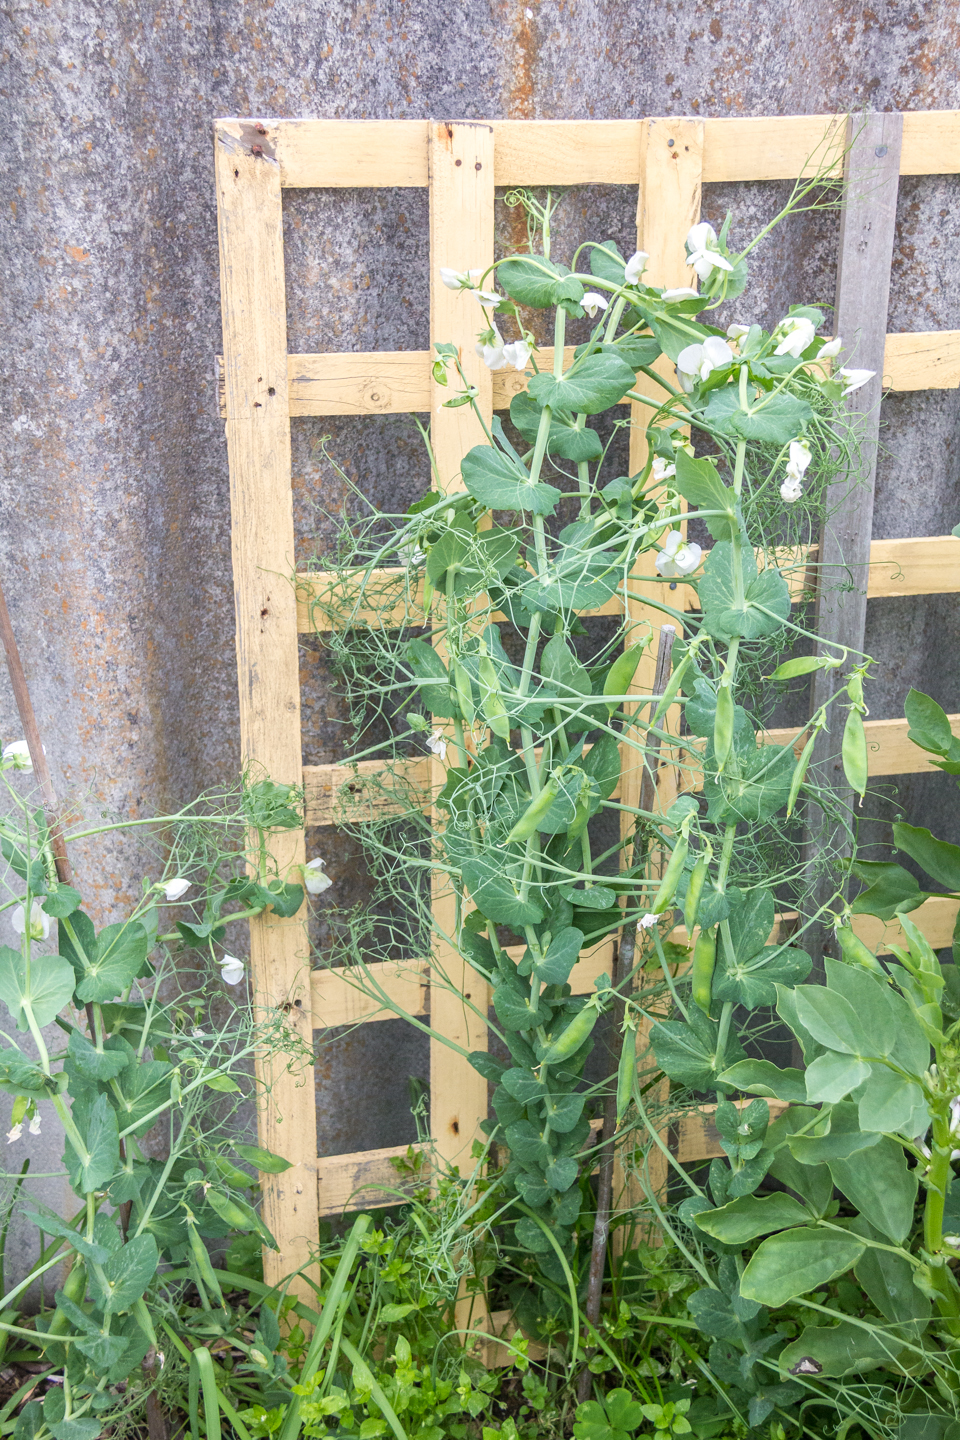 13/08/15 Day 108: Taller and producing peas